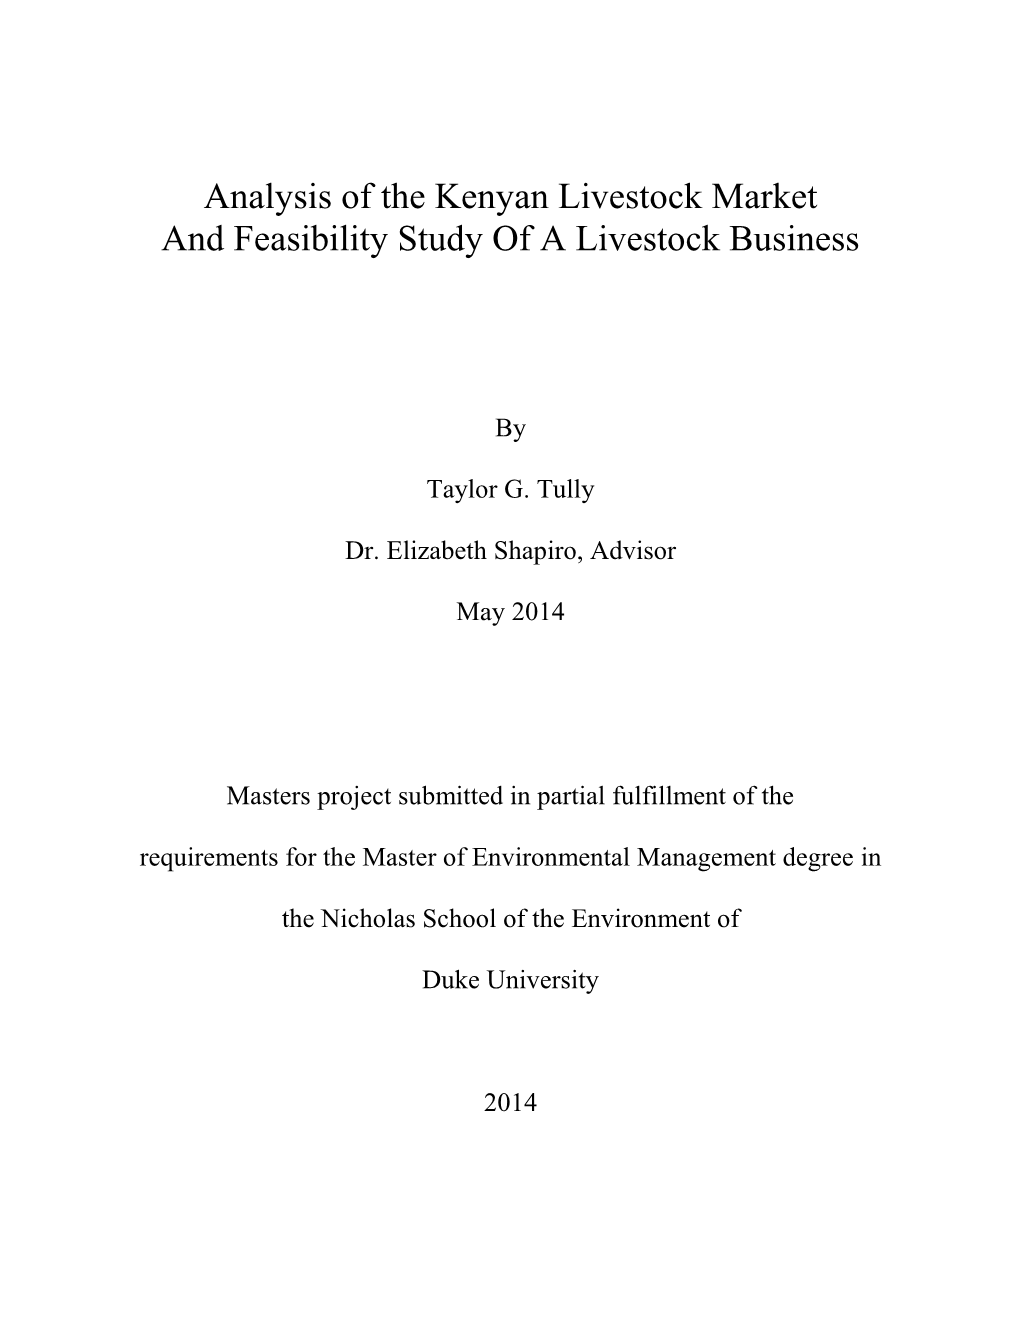 Analysis of the Kenyan Livestock Market and Feasibility Study of a Livestock Business